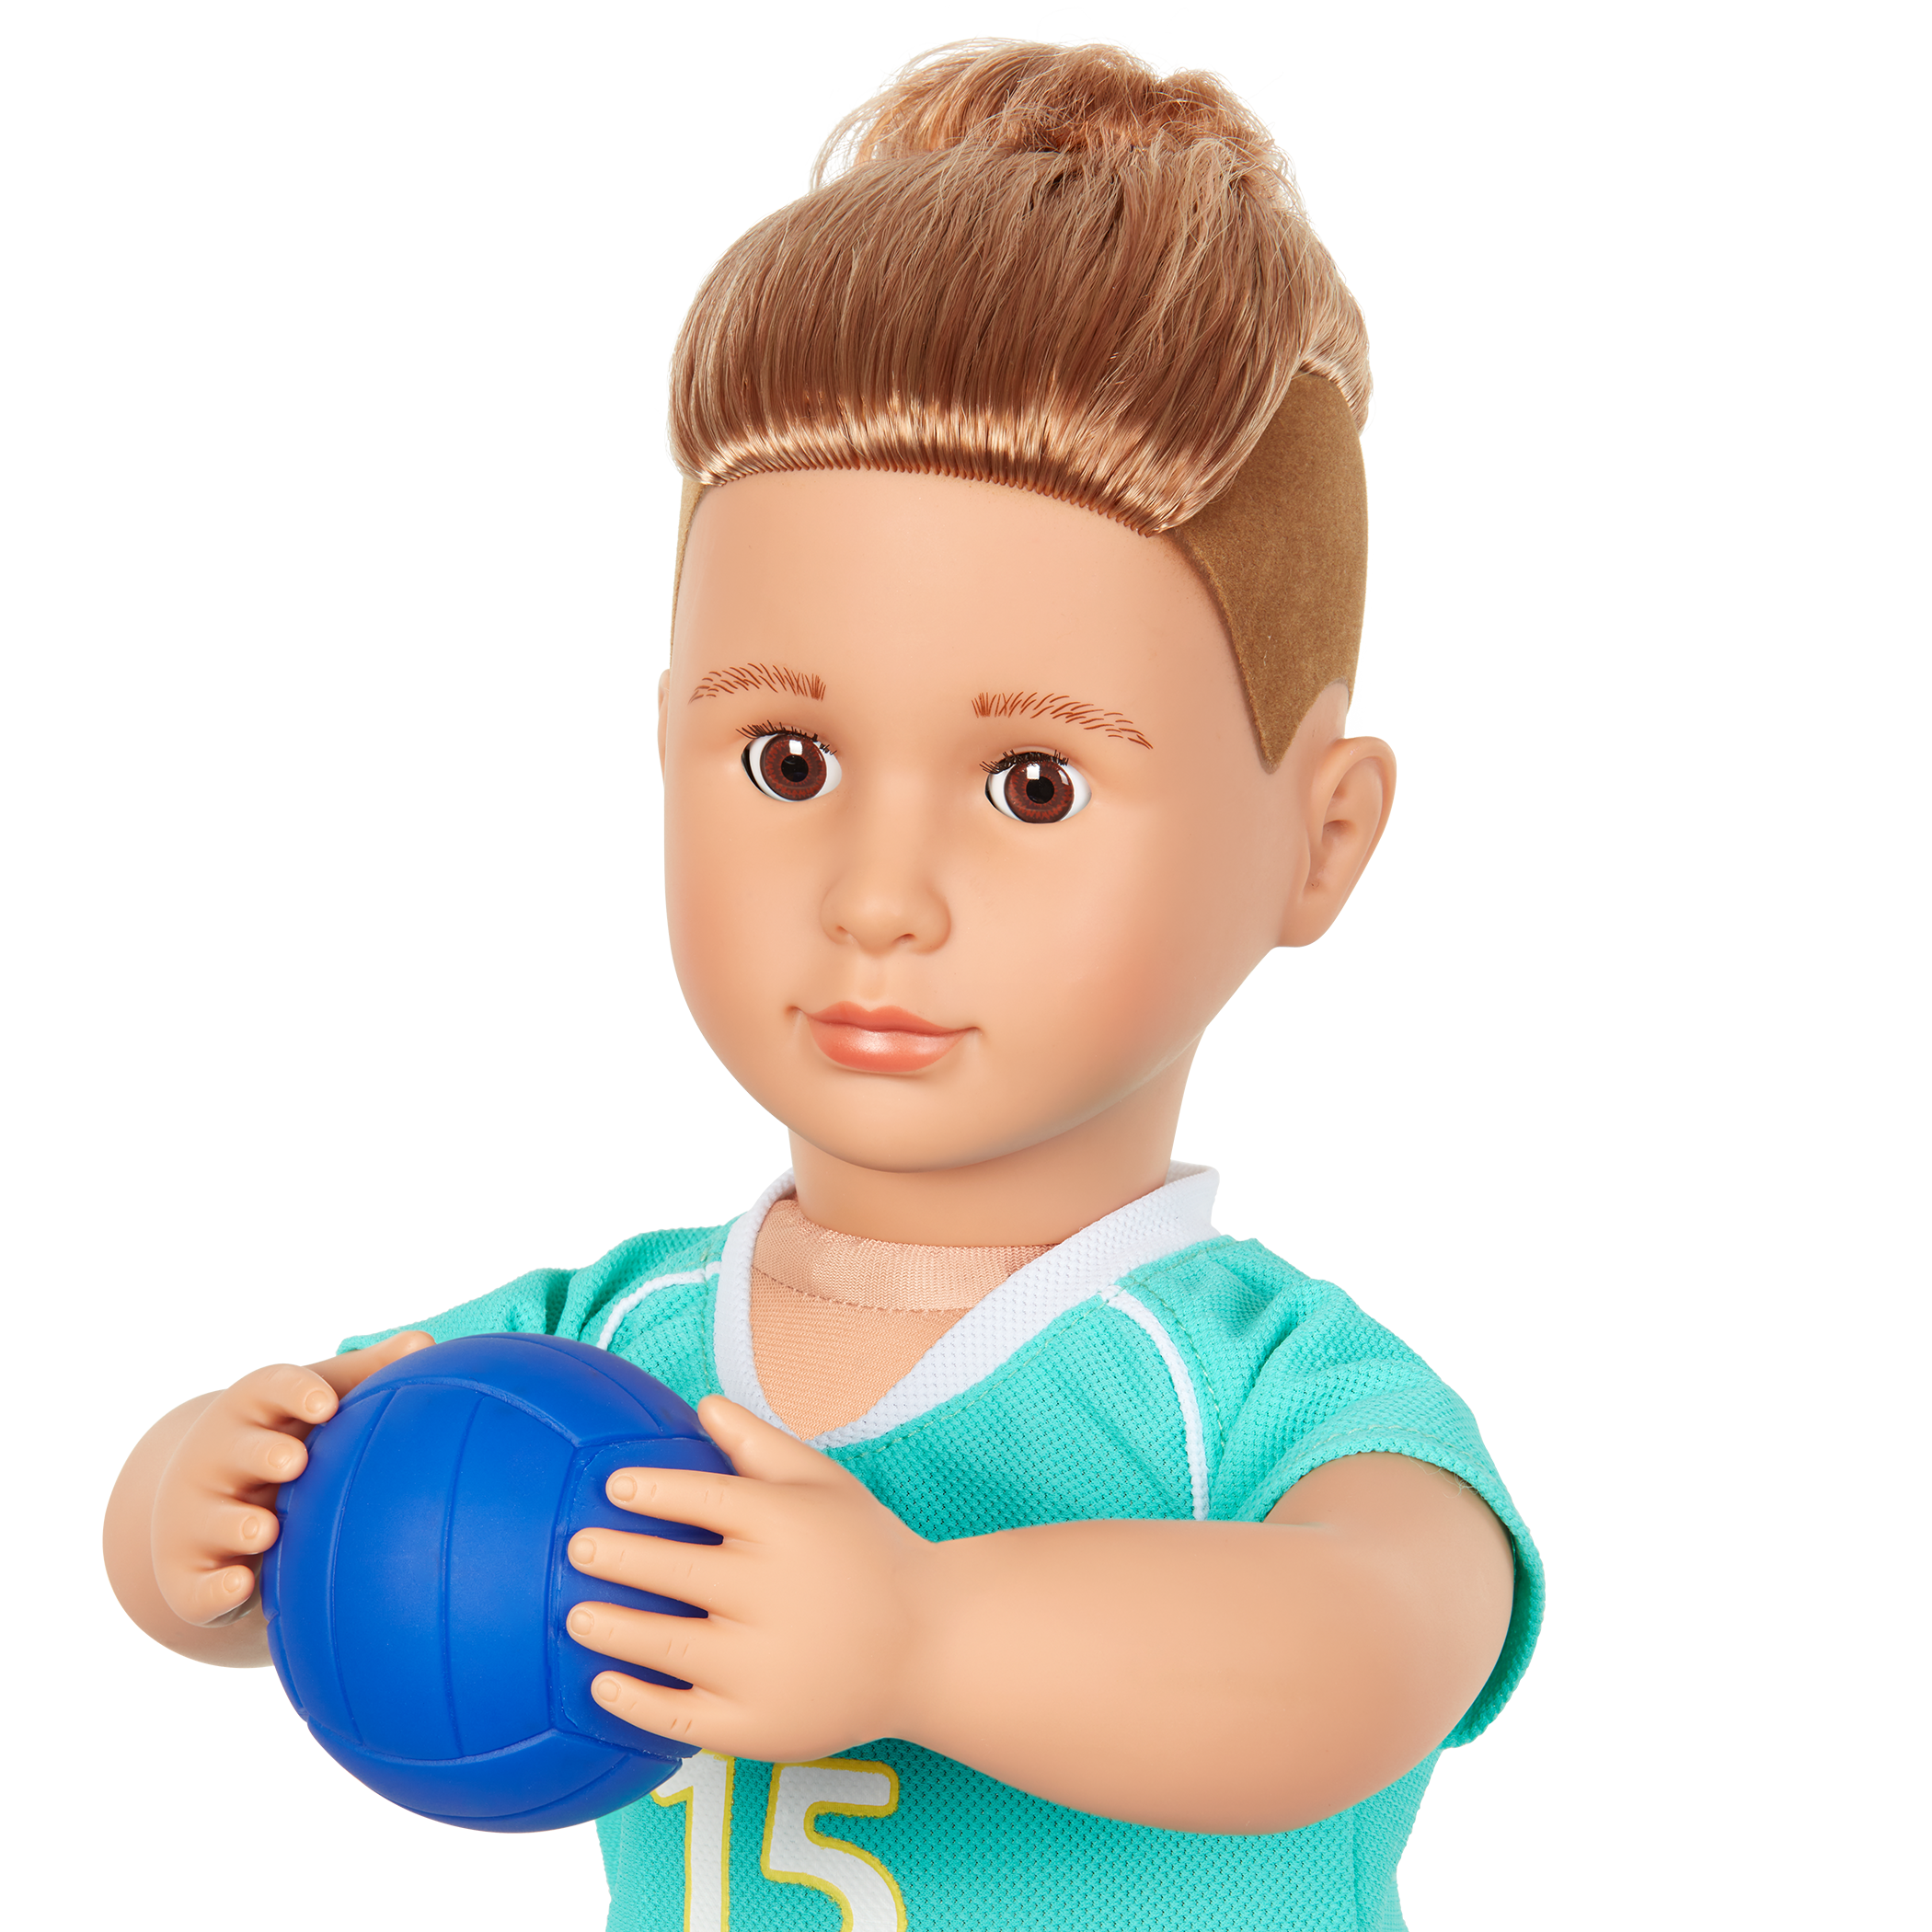 Posable 18-inch Volleyball Player Boy Doll Johnny